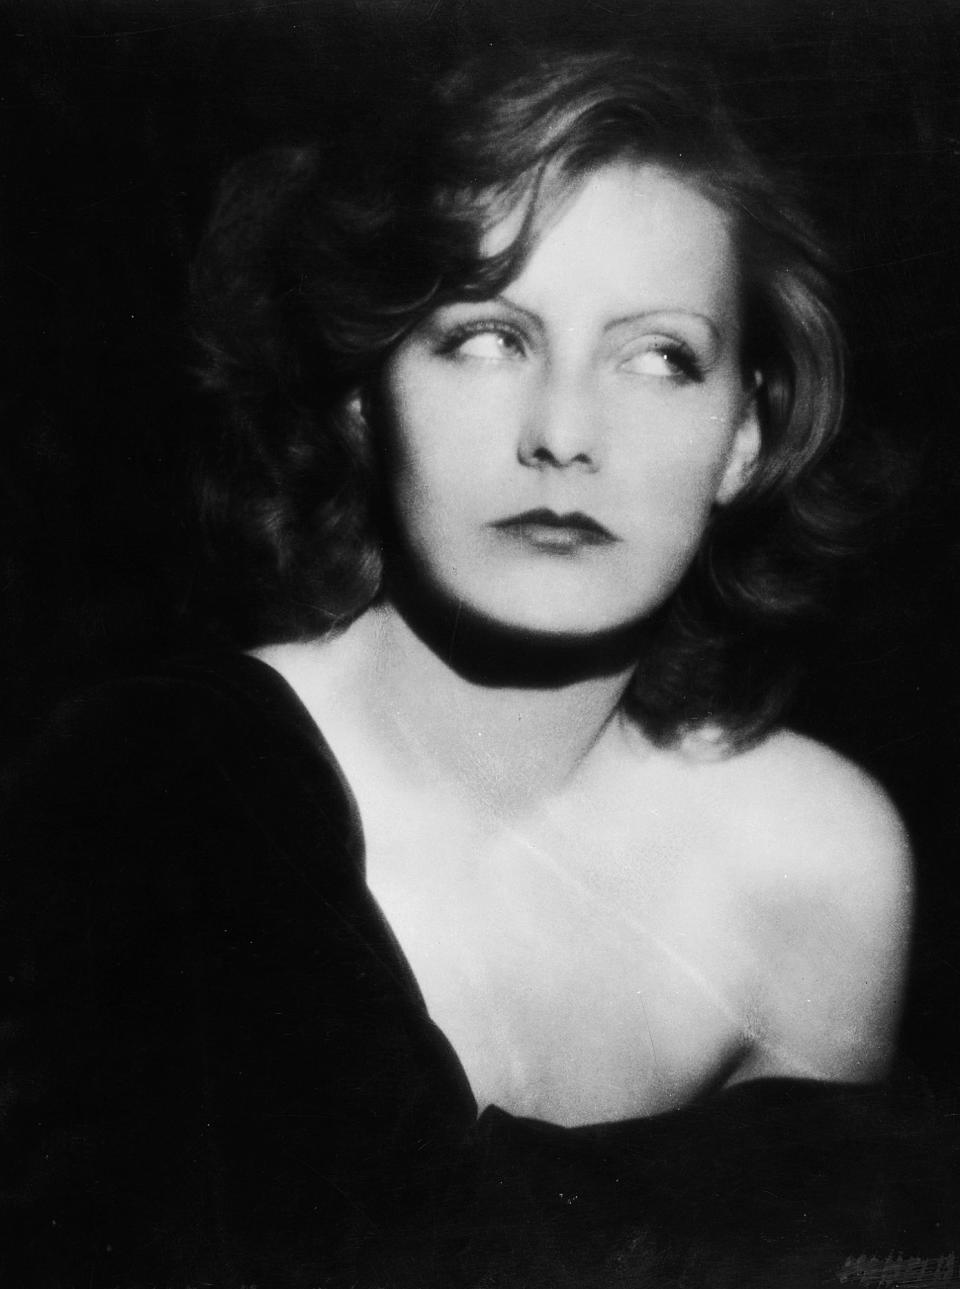 <p>Ruth Harriet Louise took this glamorous photo of actress Greta Garbo (and her iconic eyebrows) in 1926. </p>